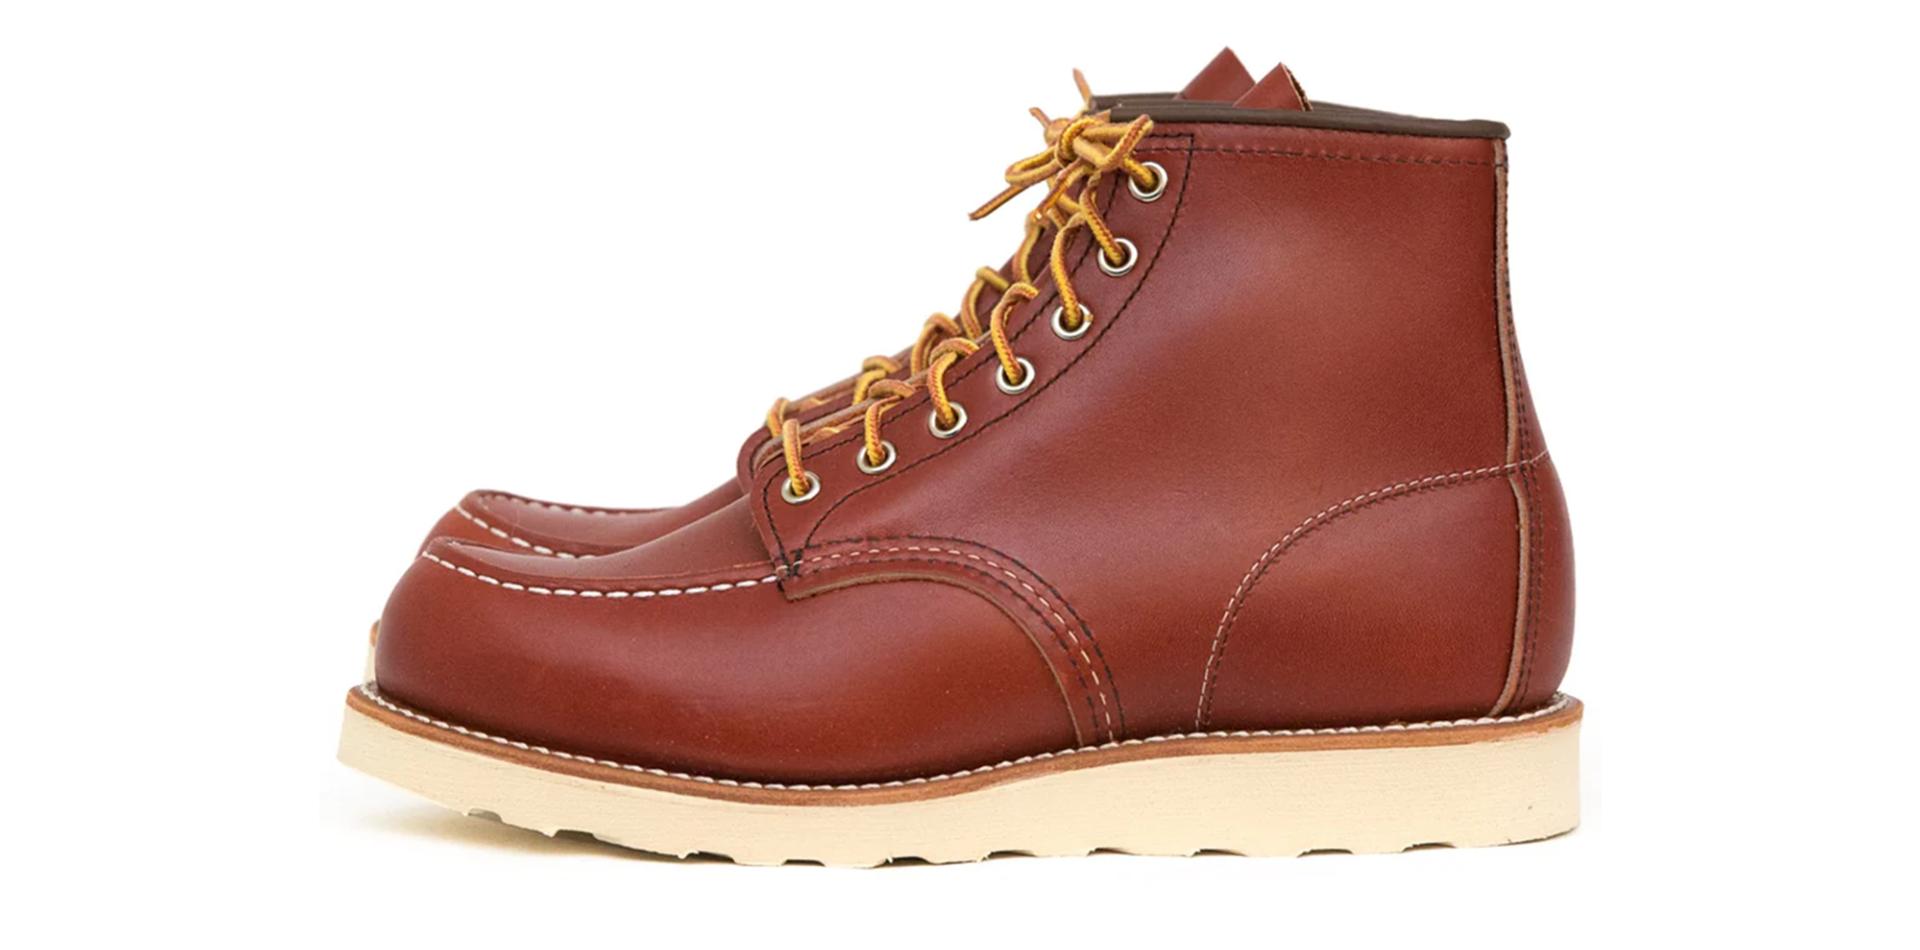 RED WING 8131